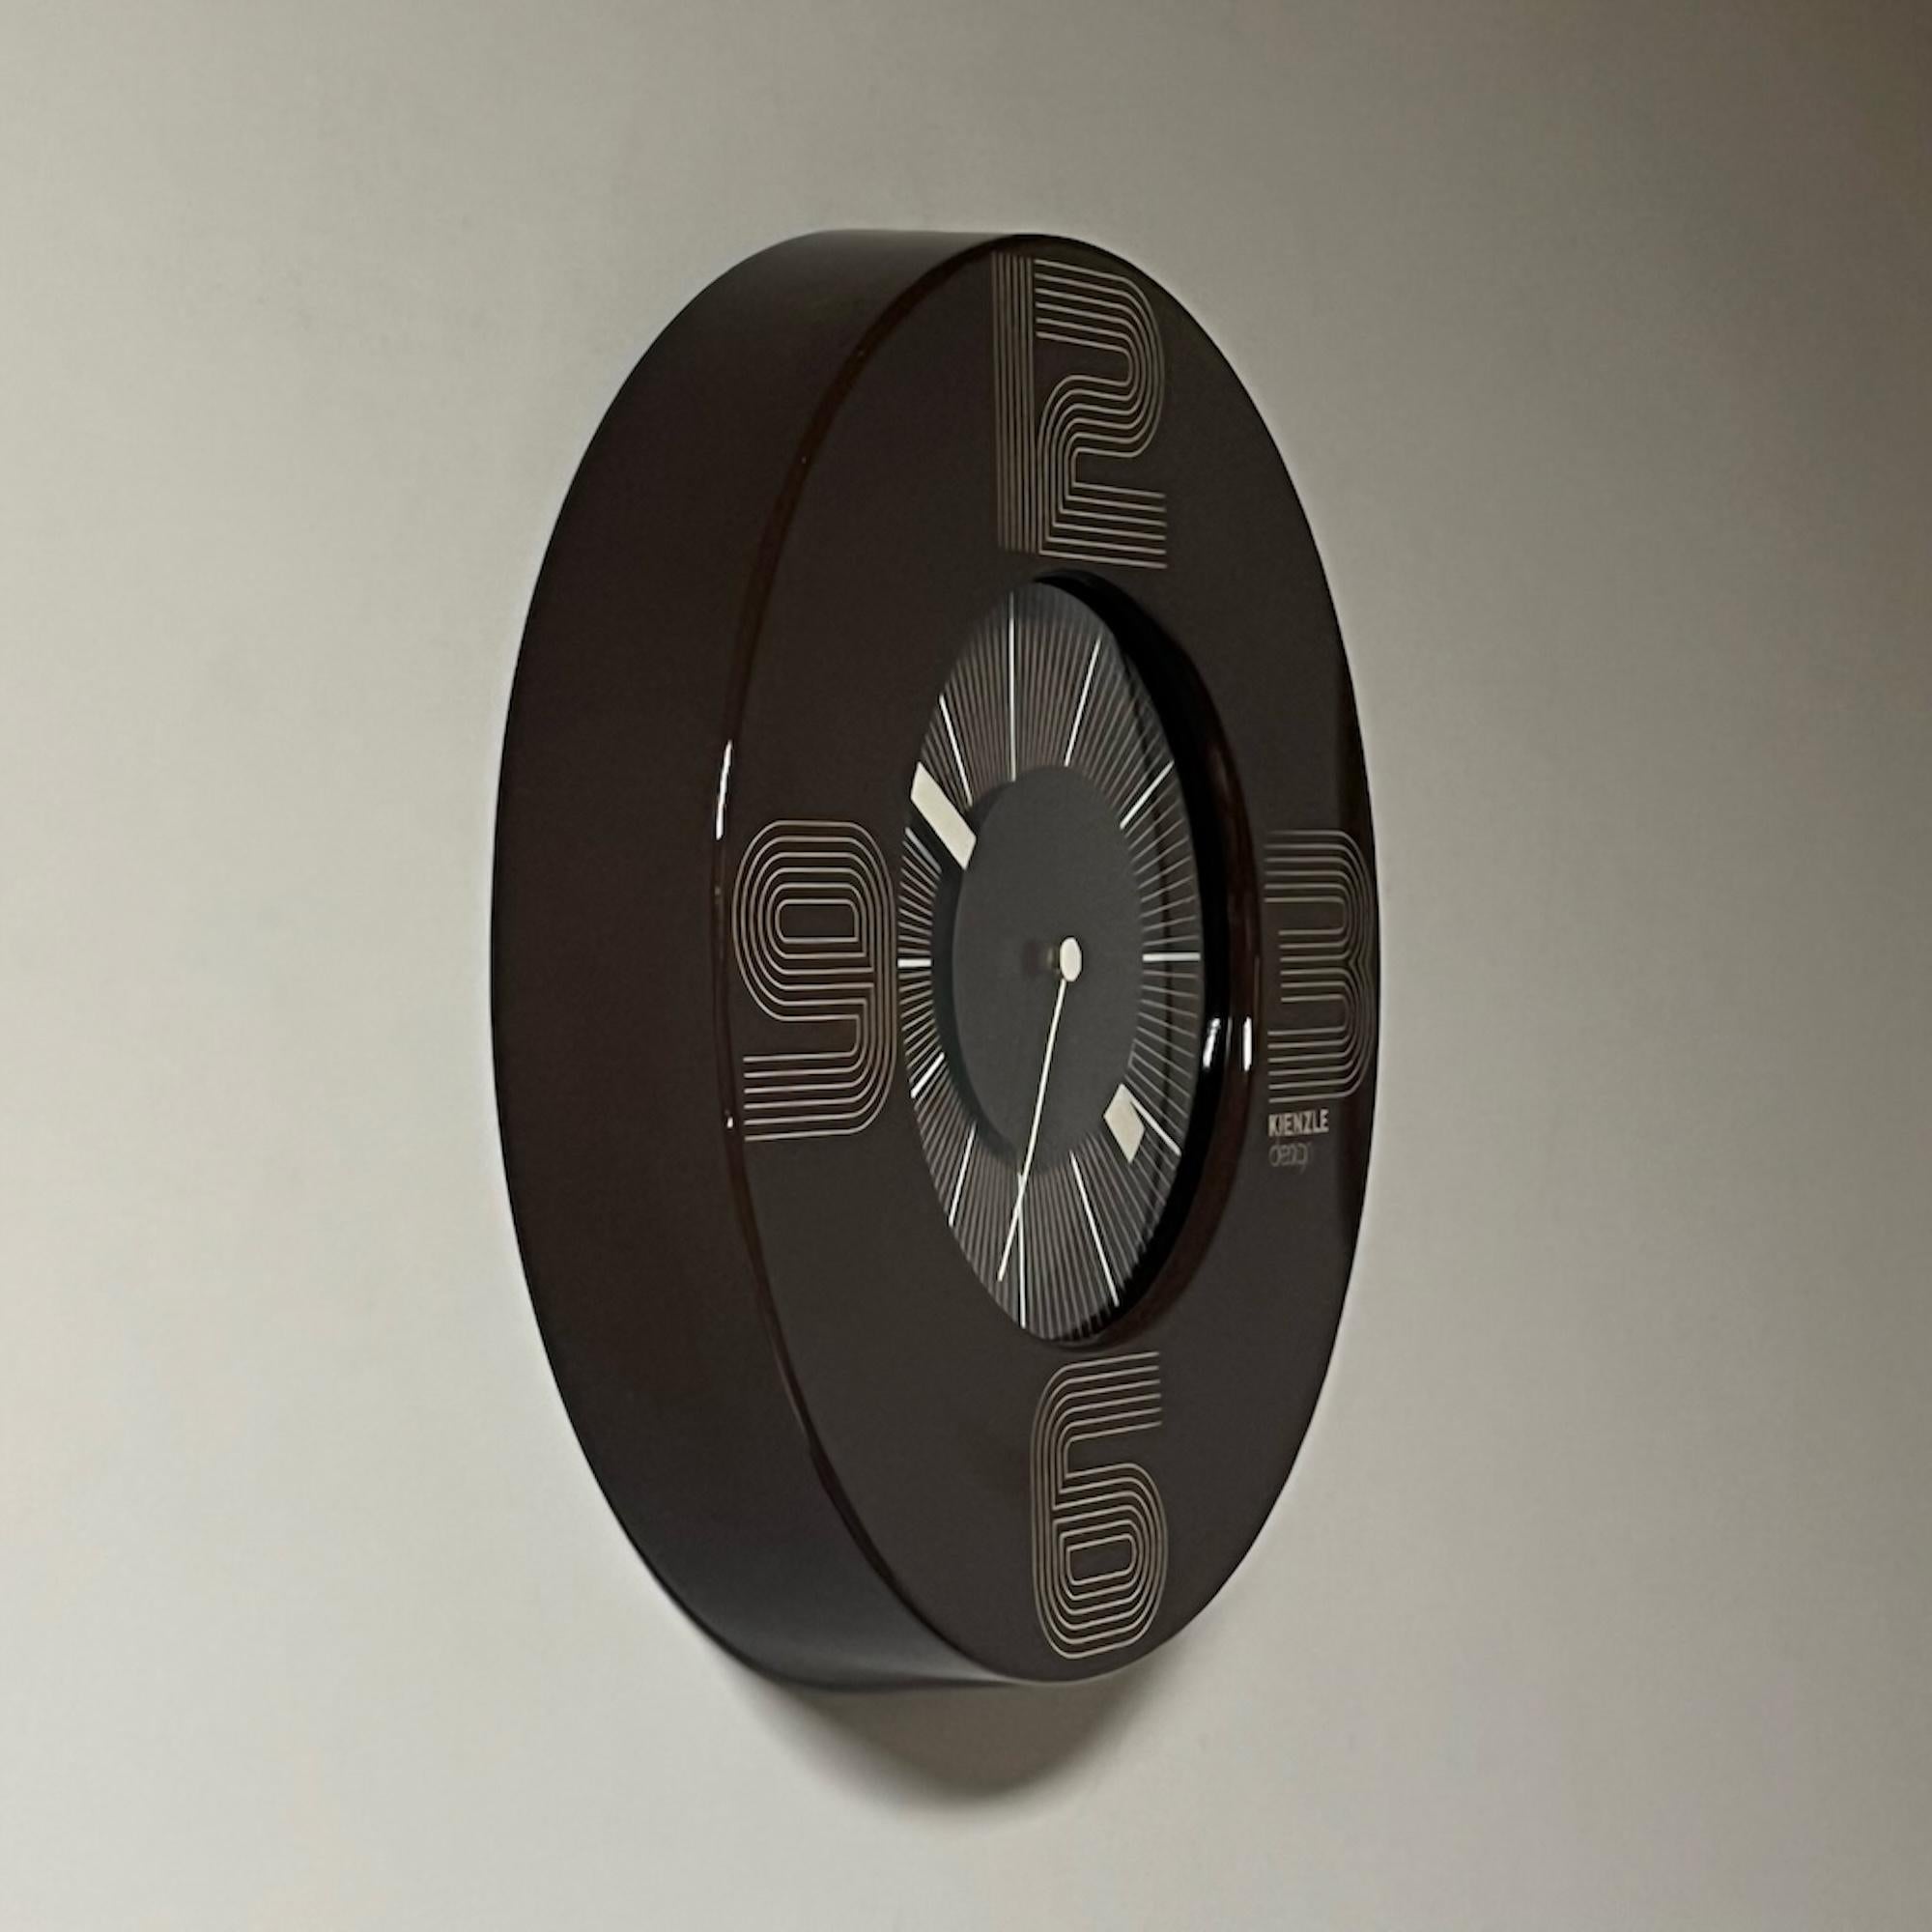 Amazing space age clock with a futuristic design made by Kienzle West Germany in the 1970s.

This unique vintage clock has a body made of lacquered brown metal that perfectly matches with the futuristic design of hours numbers and the distinctive